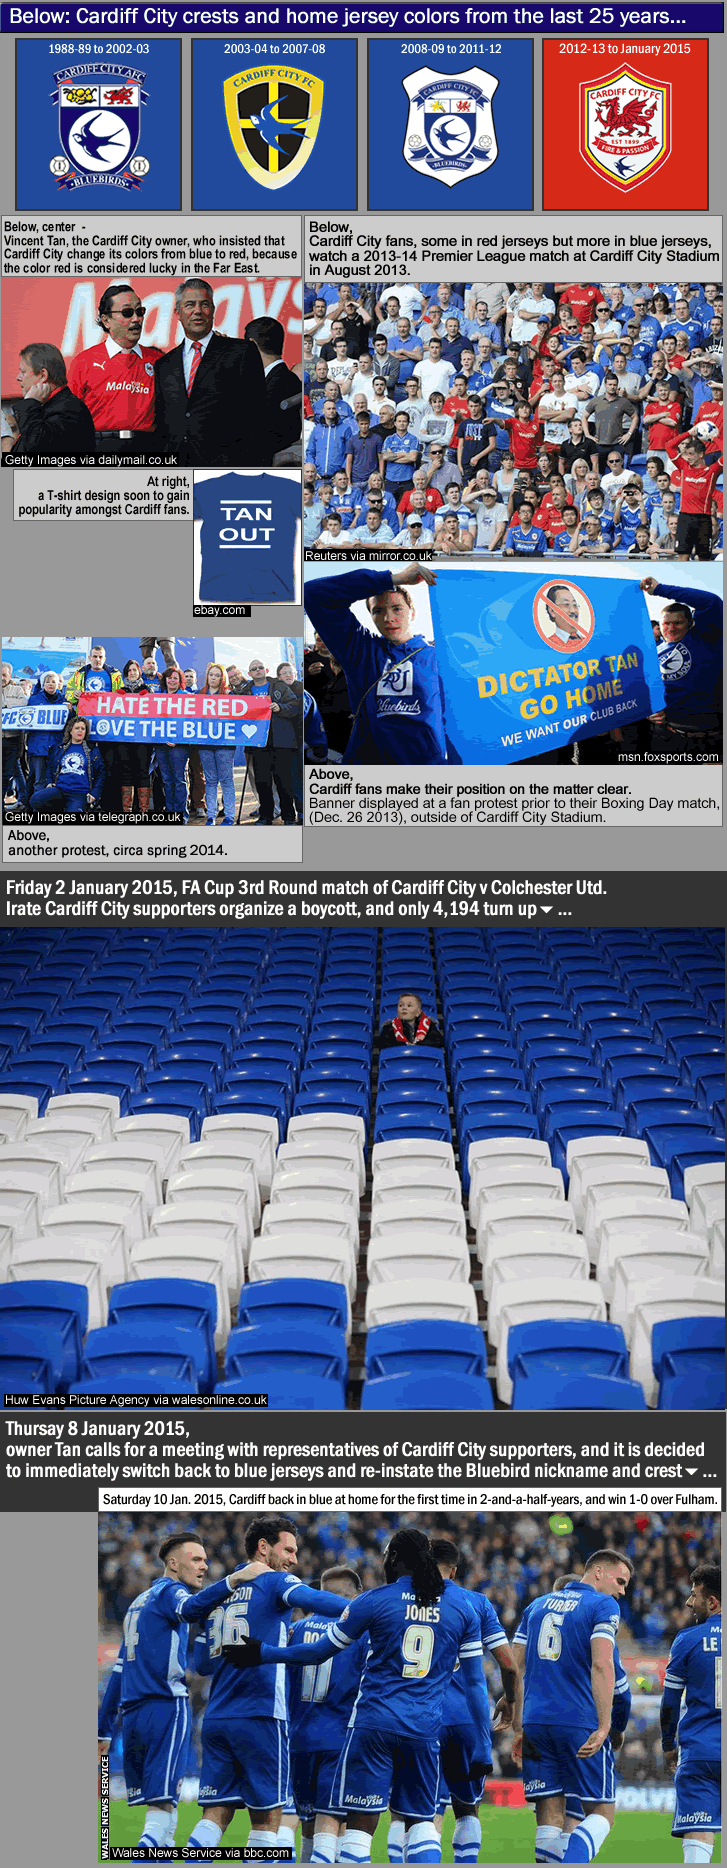 cardiff-city-fans_see-red-and-boycott_jan-2015-fa-cup_back-to-blue-for-the-bluebirds_b_.gif